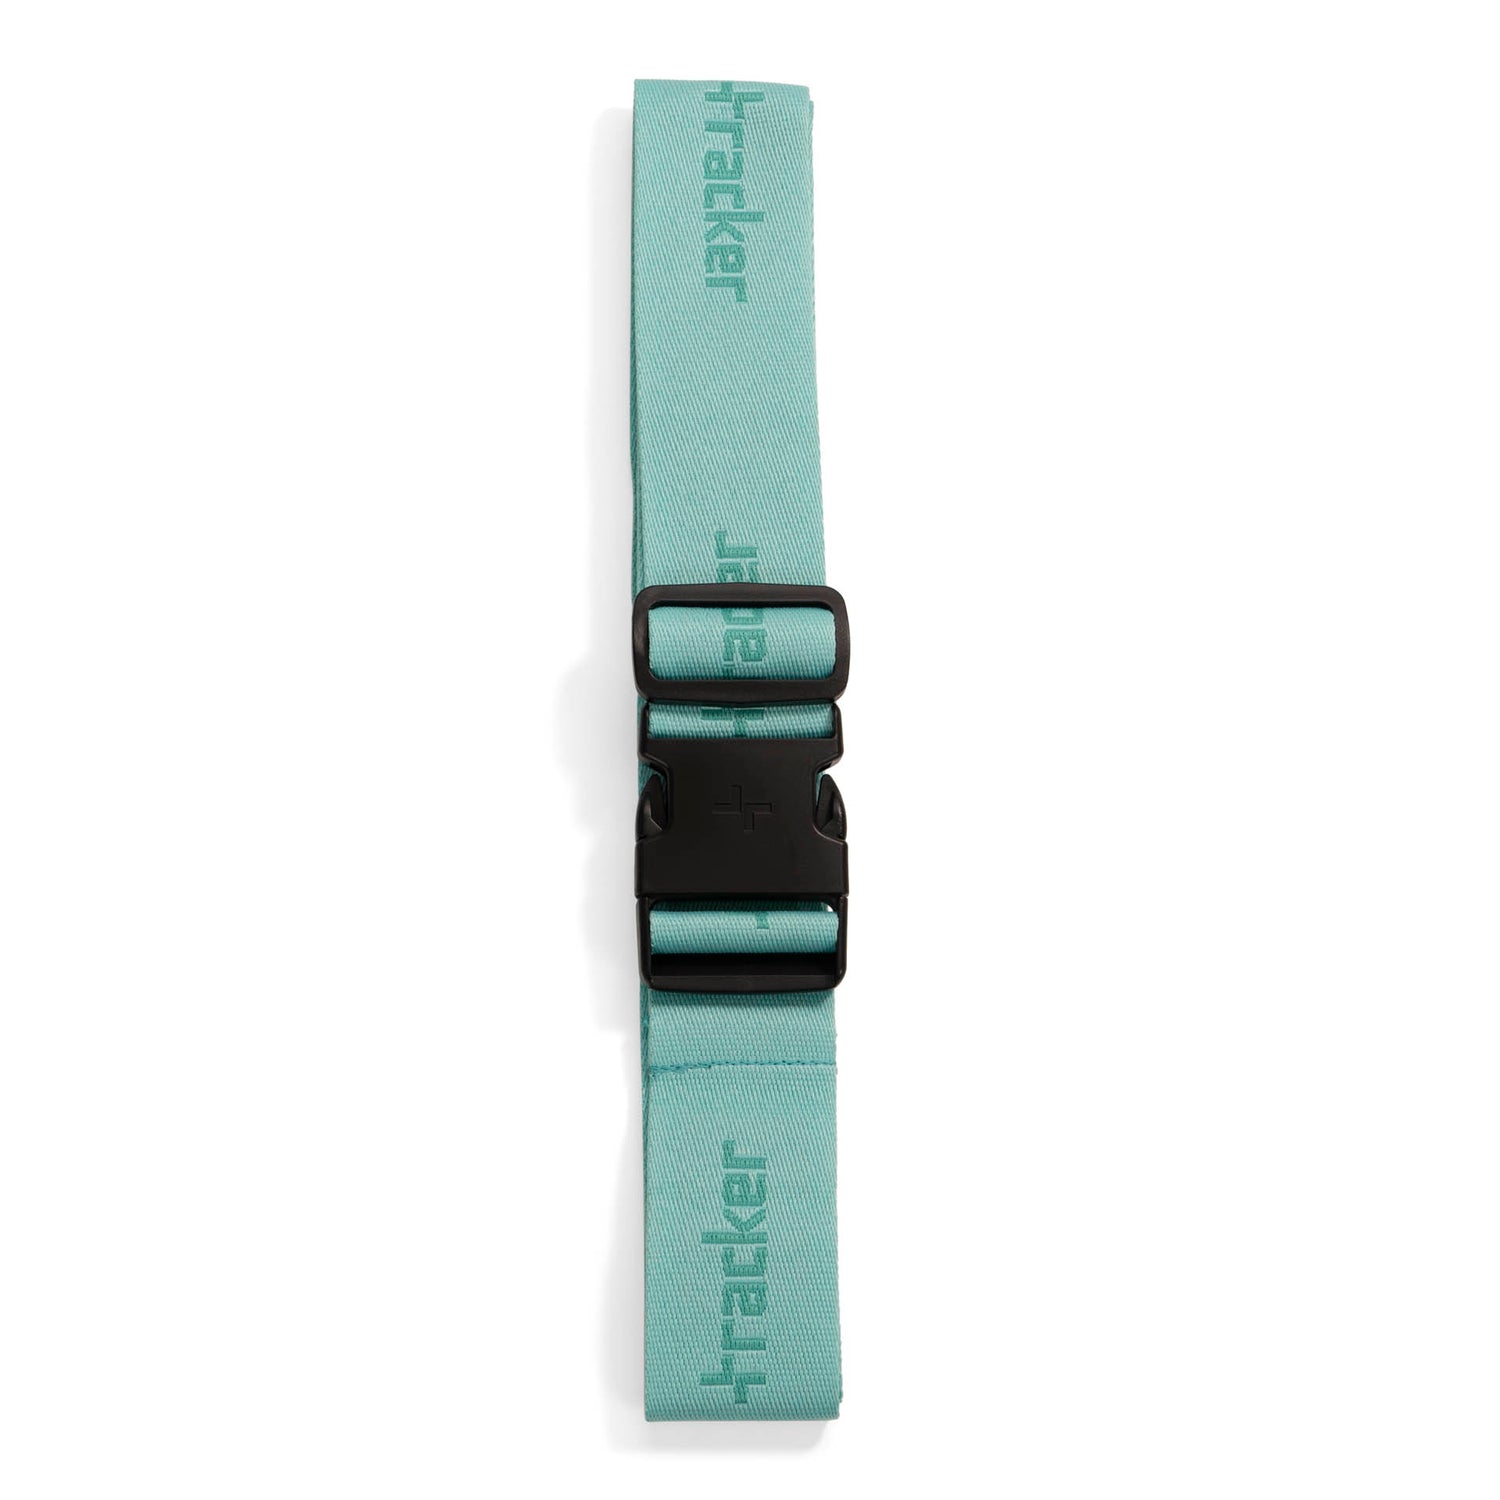 Teal luggage strap designed by Tracker called Tracker Logo folded and buckled showing the tracker logo pattern printed on the entirety of the polyester.